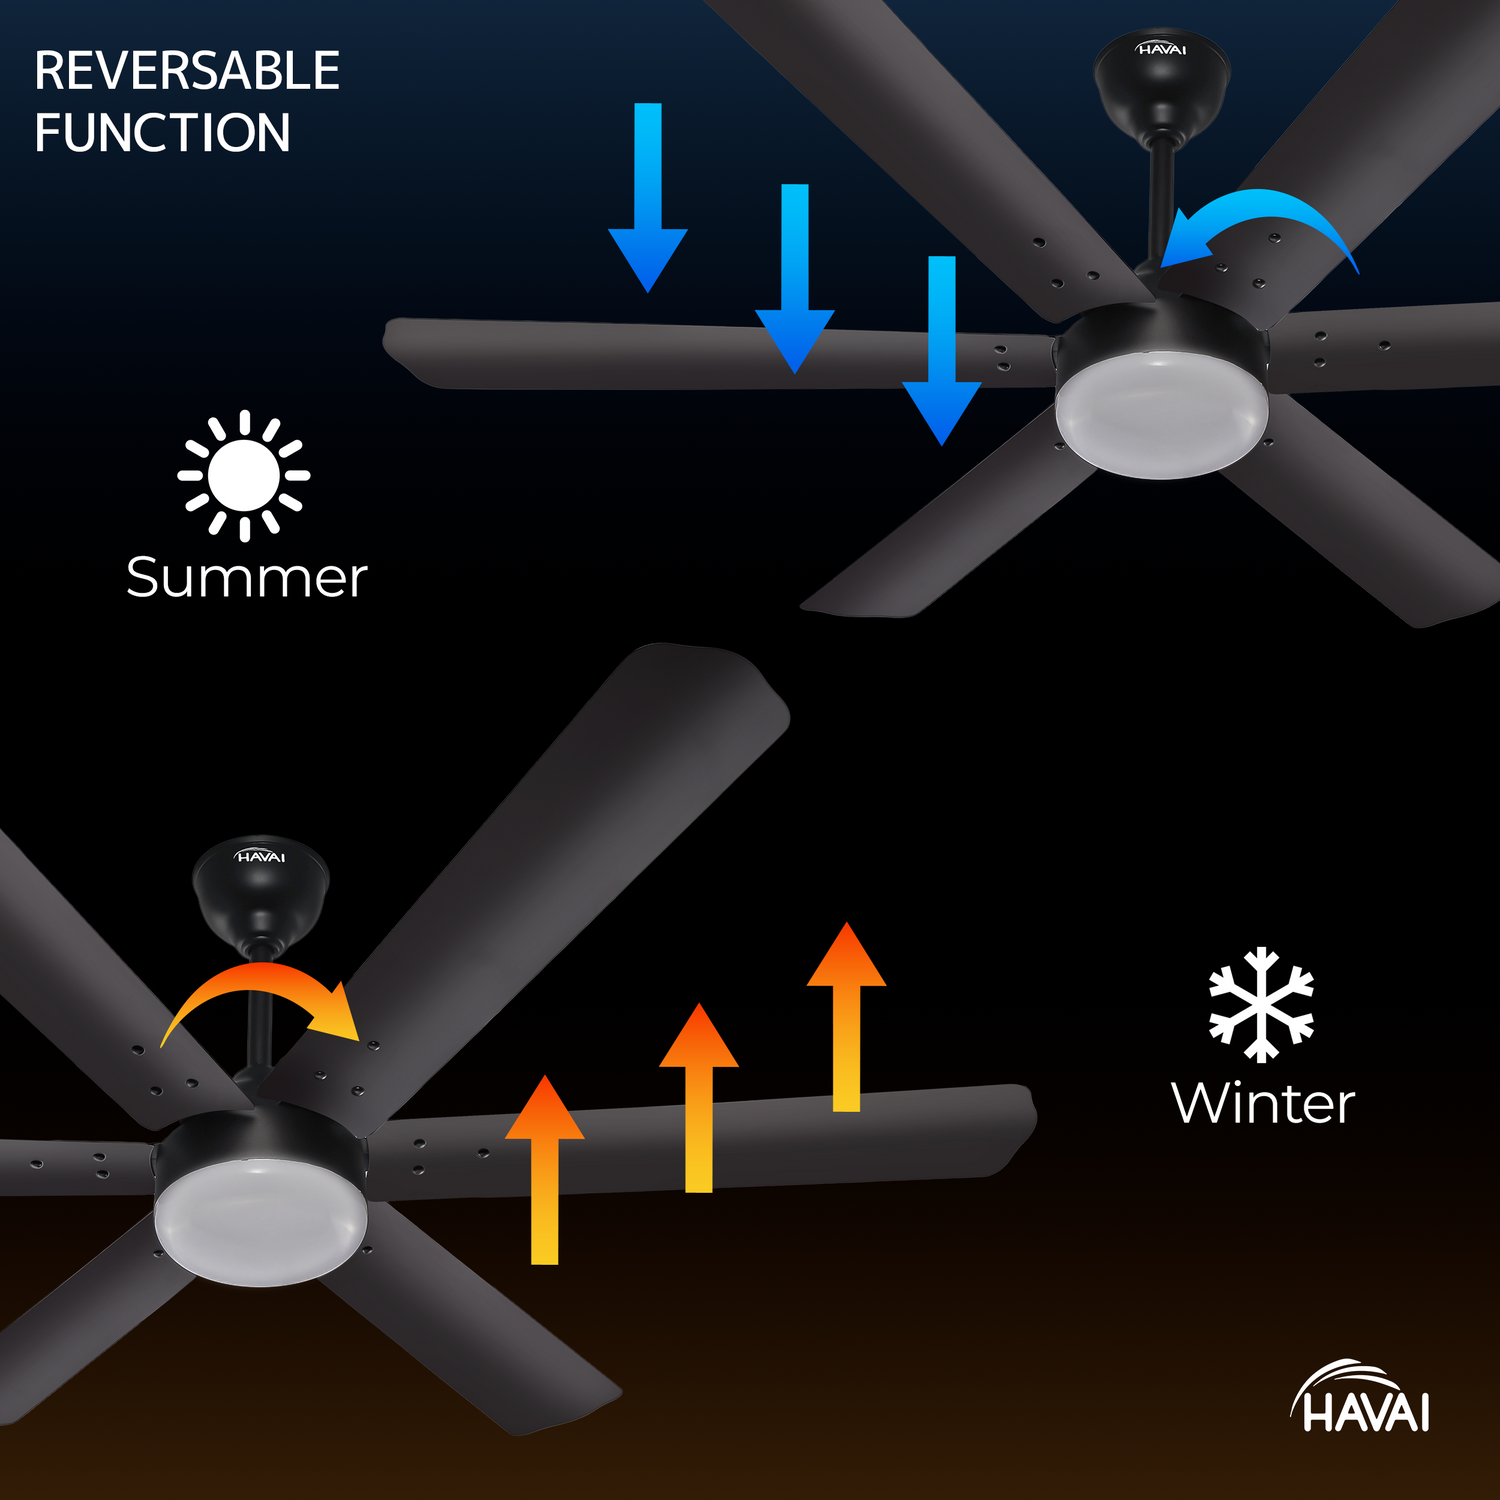 HAVAI Spinel BLDC Ceiling Fan 35W, 1200mm Blade with Remote - Smoky Brown,0.5W LED Light